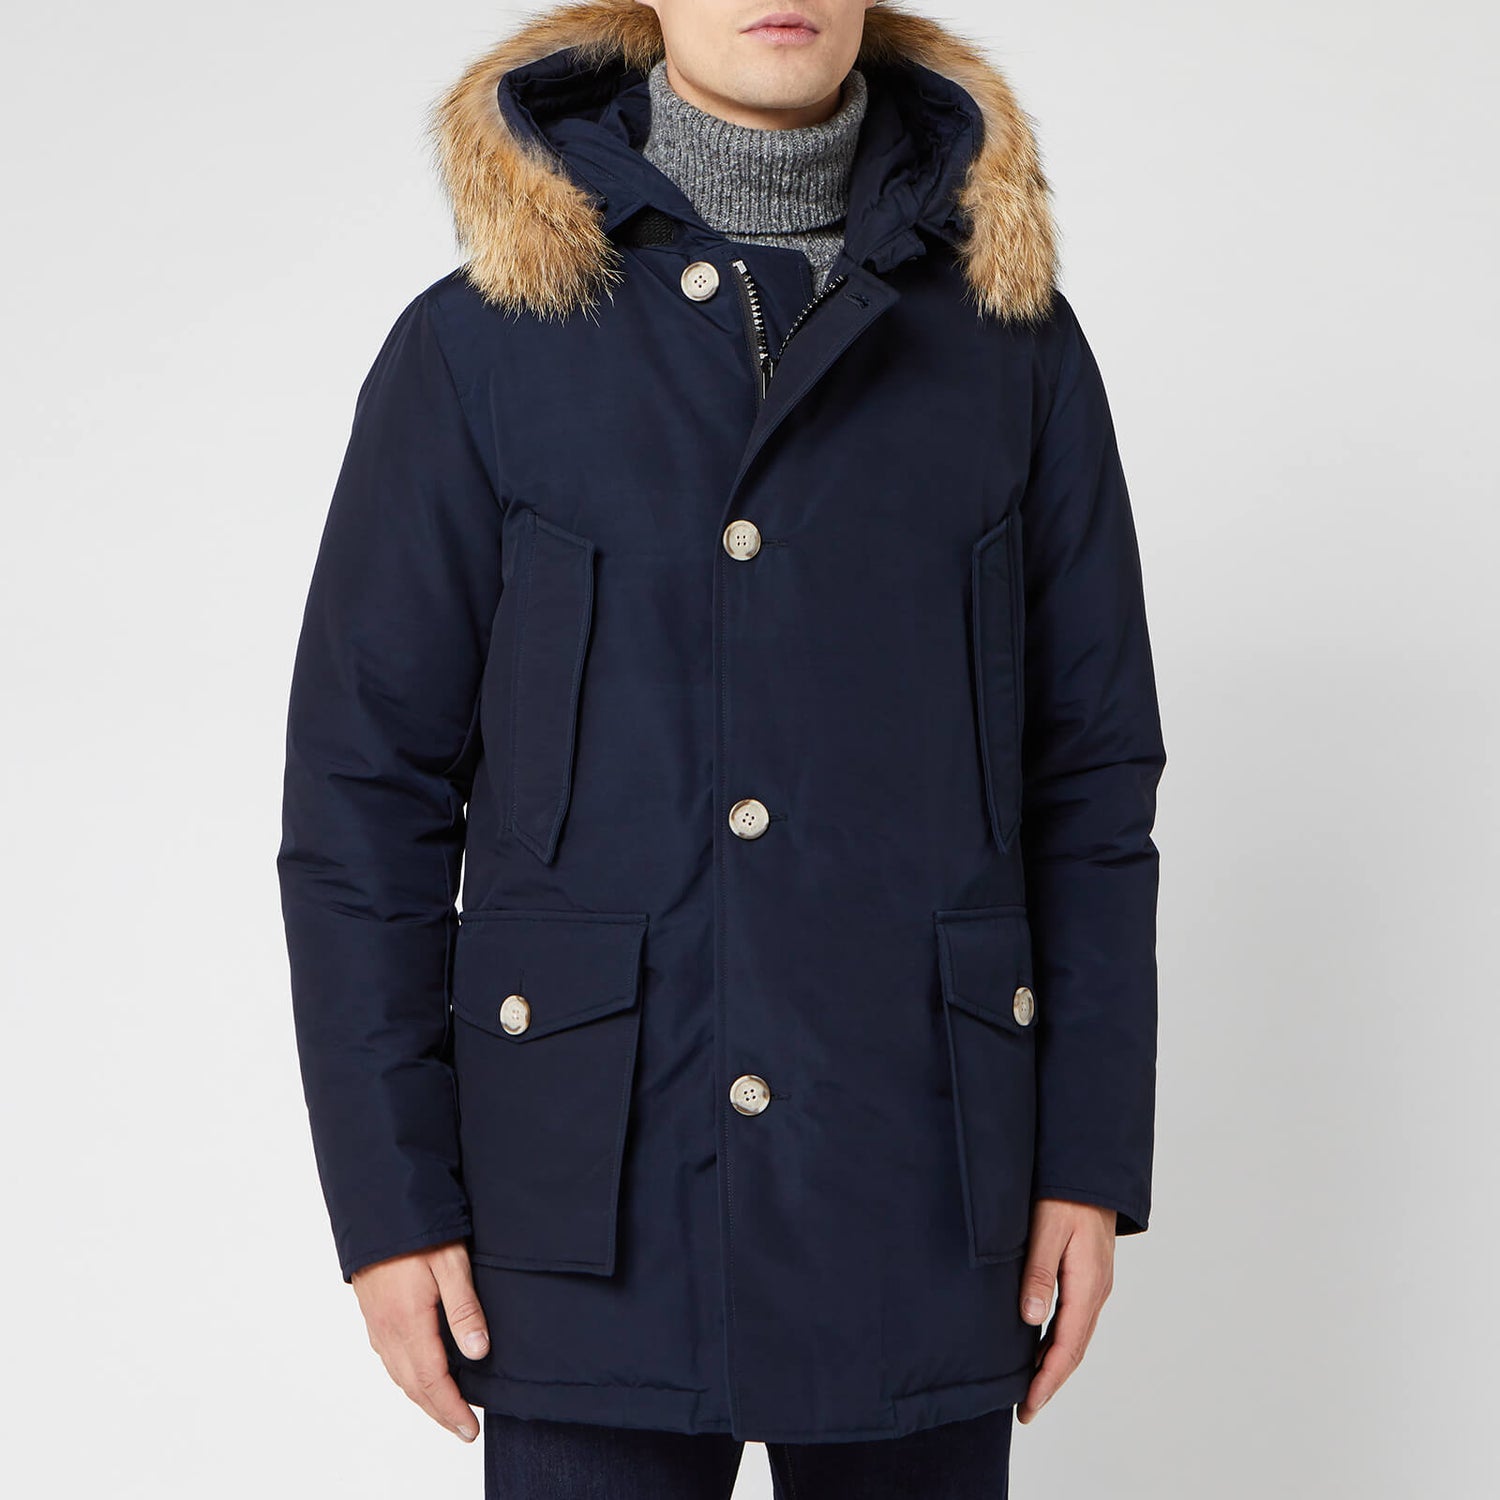 Woolrich Men's Artic Parka DF - Melton Blue - Free UK Delivery Available